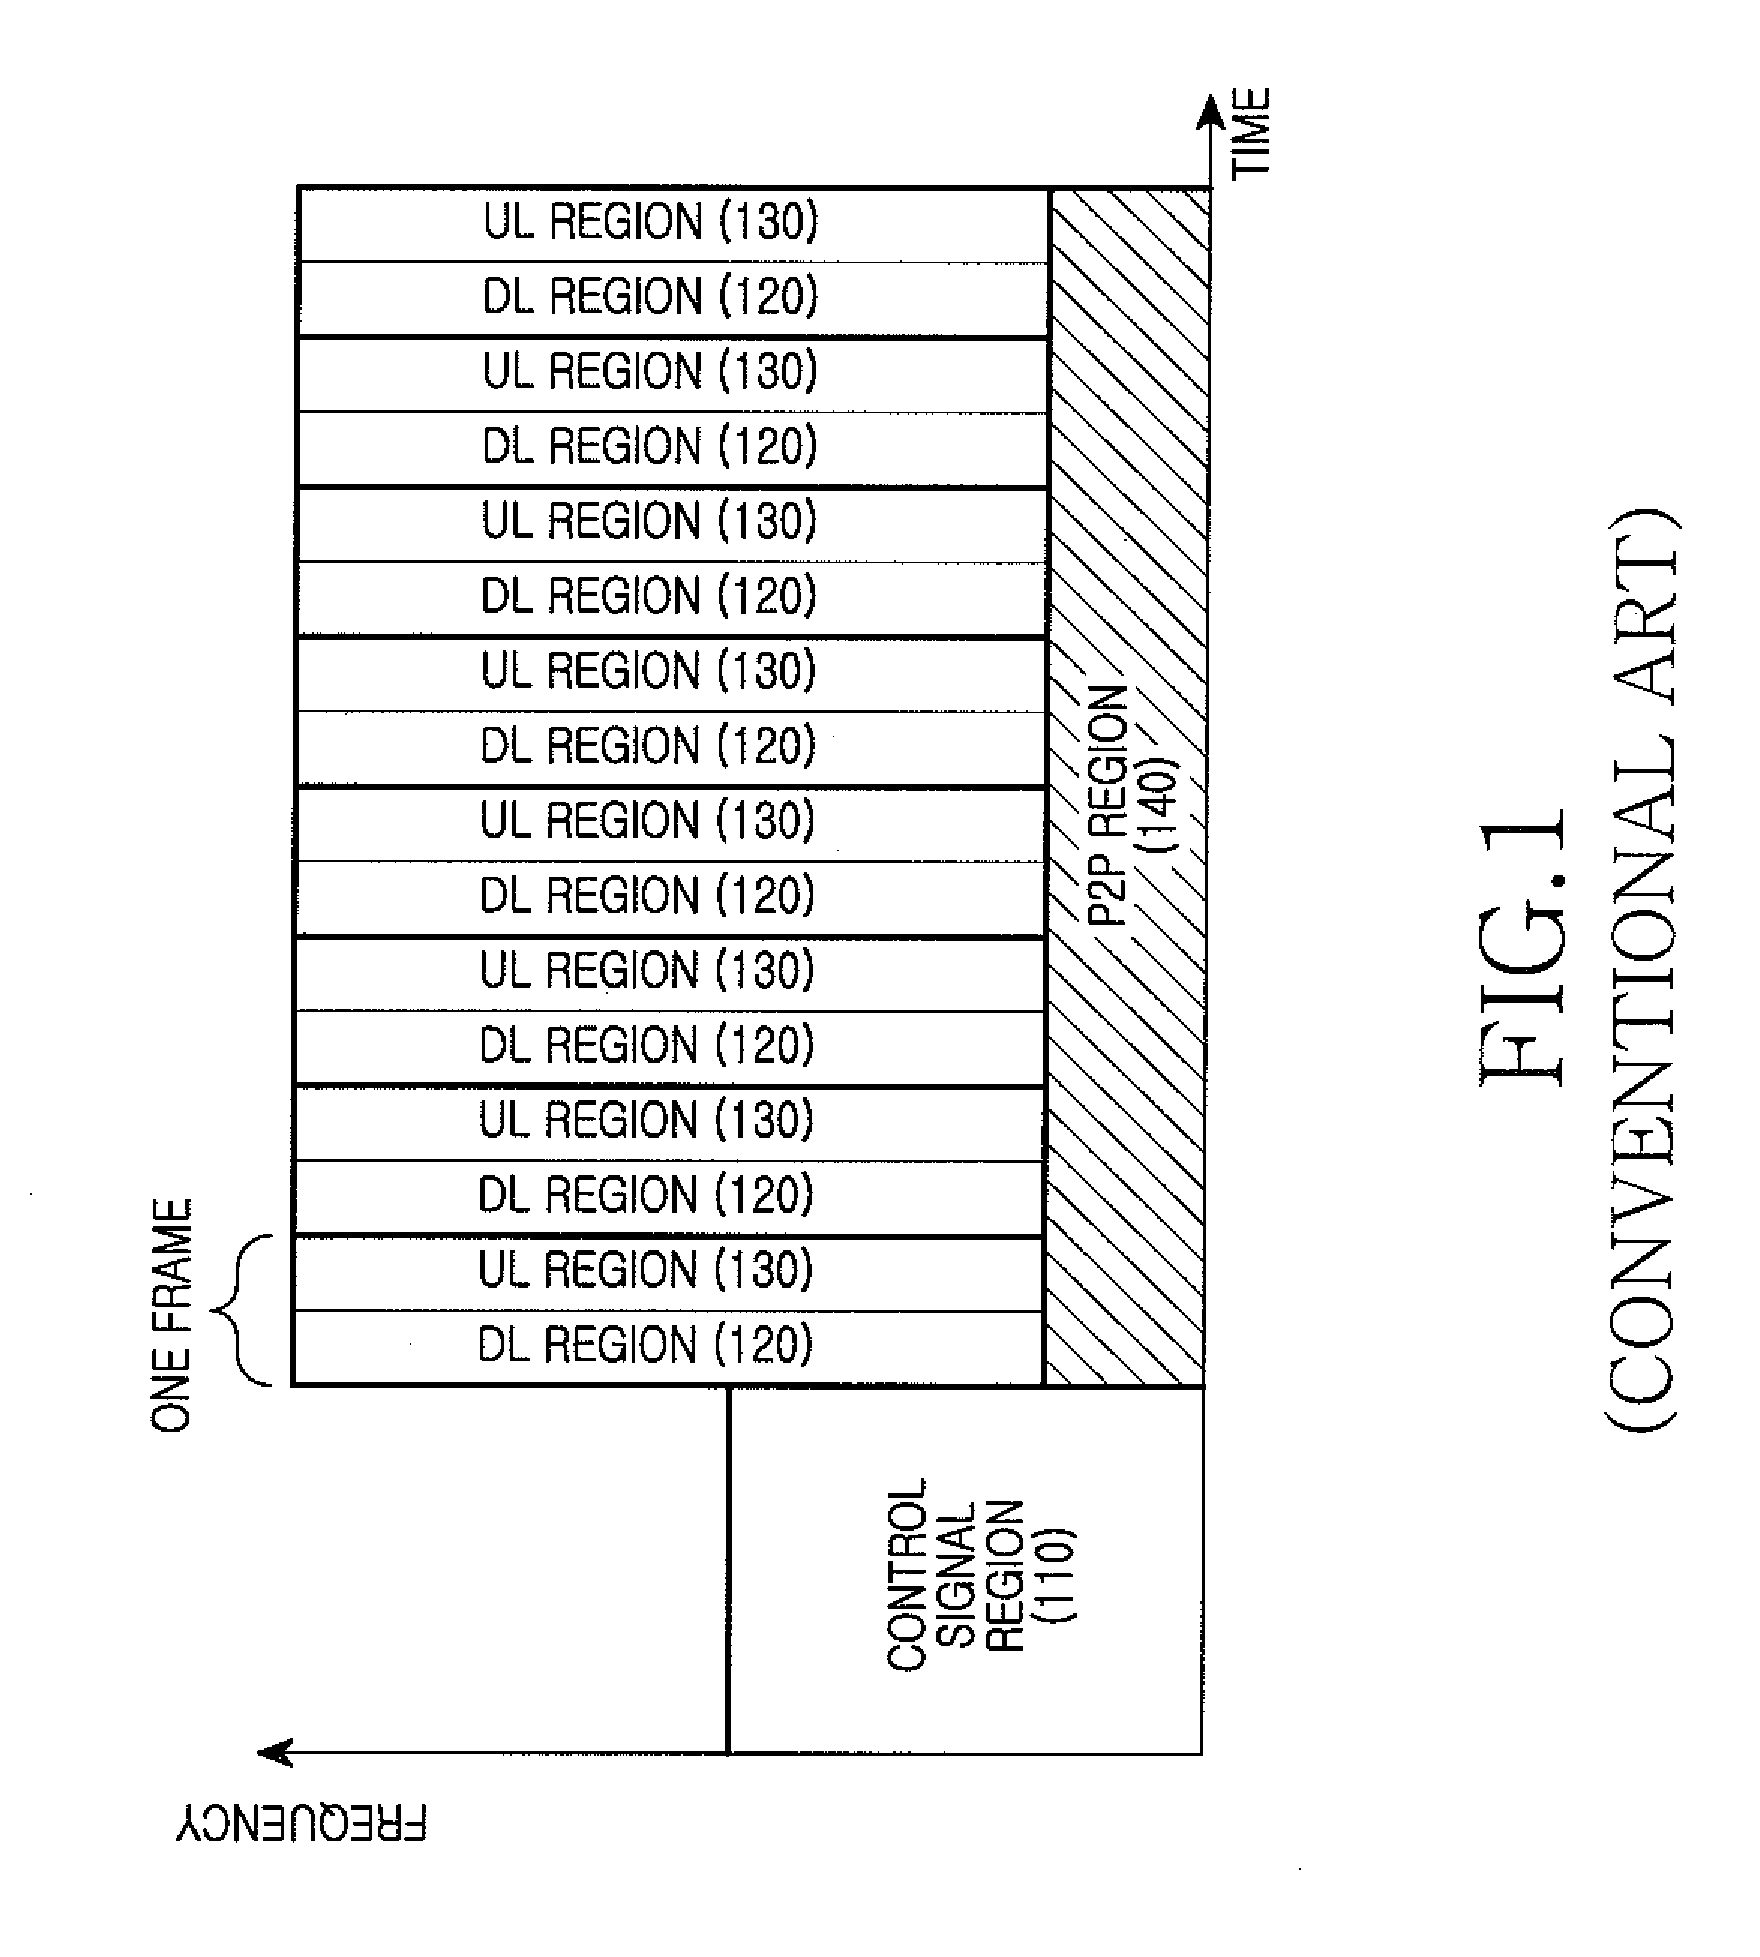 Apparatus and method for peer-to-peer (P2P) communications in a broadband wireless communication system